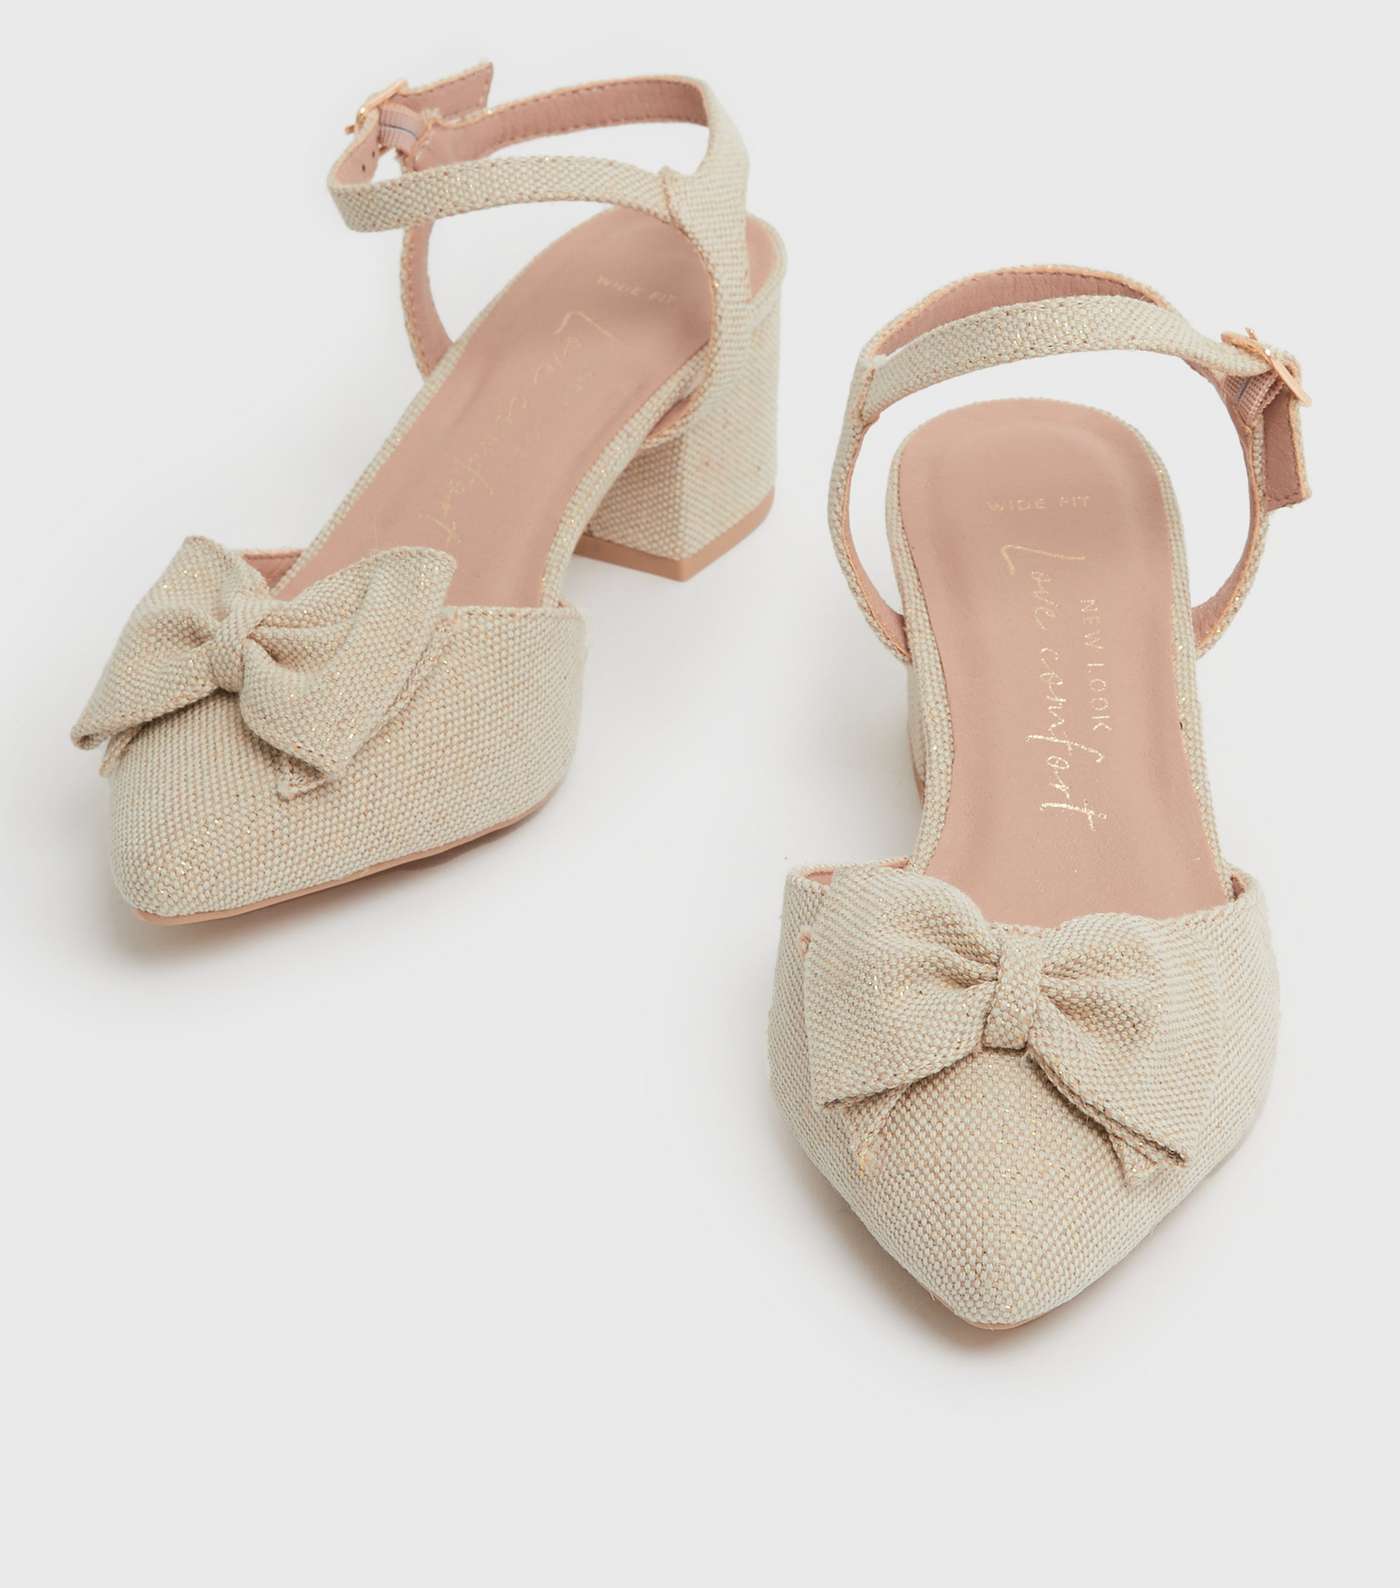 Wide Fit Off White Bow 2 Part Low Block Heel Sandals Image 3